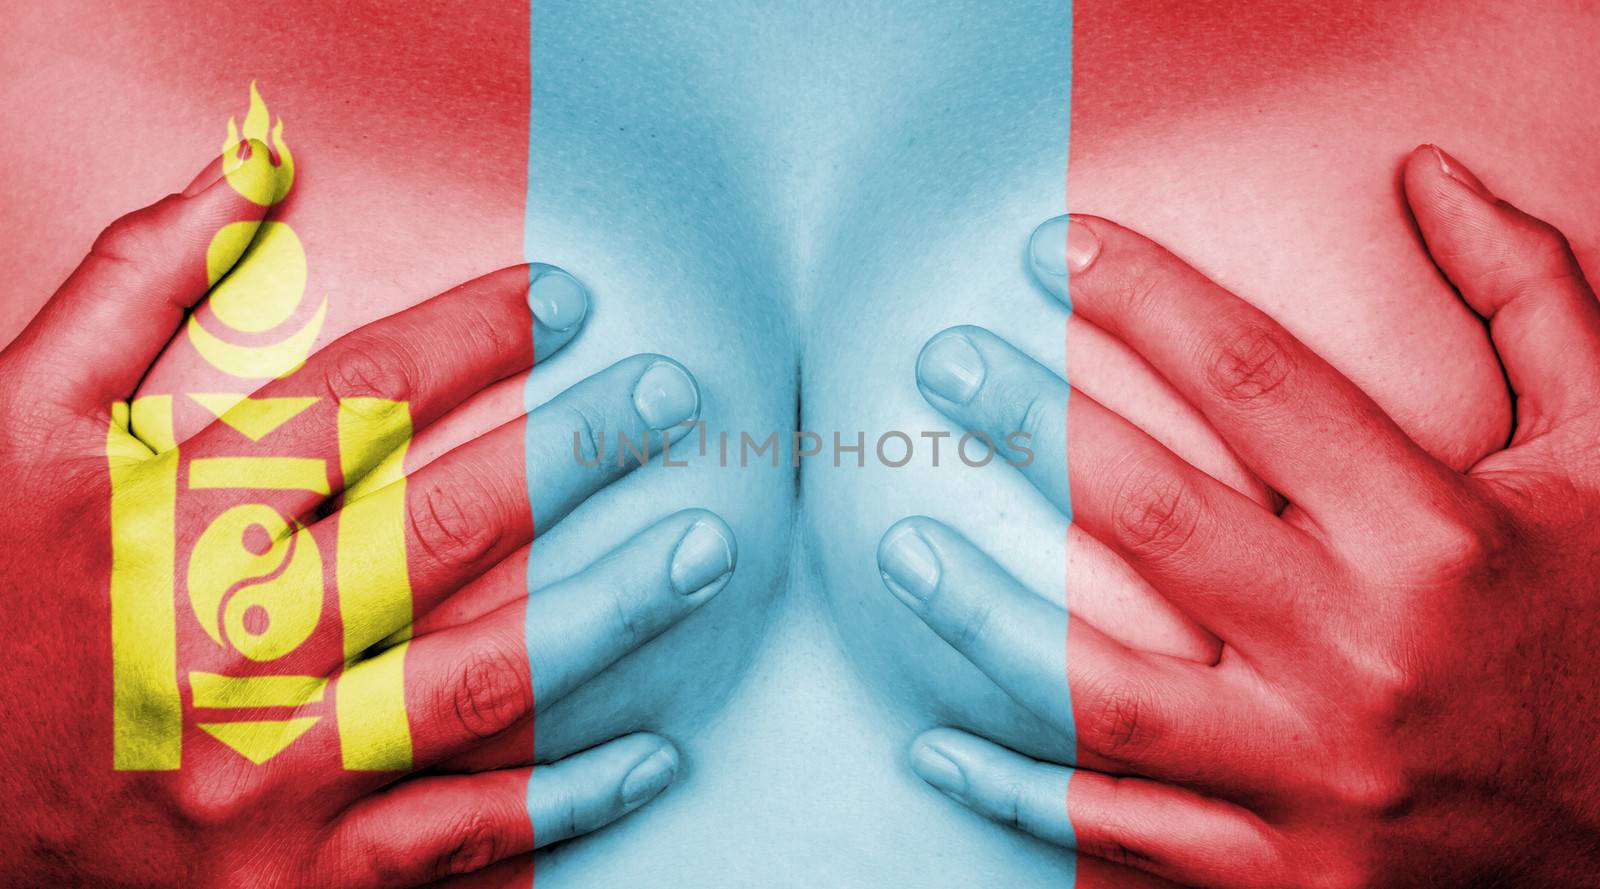 Hands covering breasts by michaklootwijk